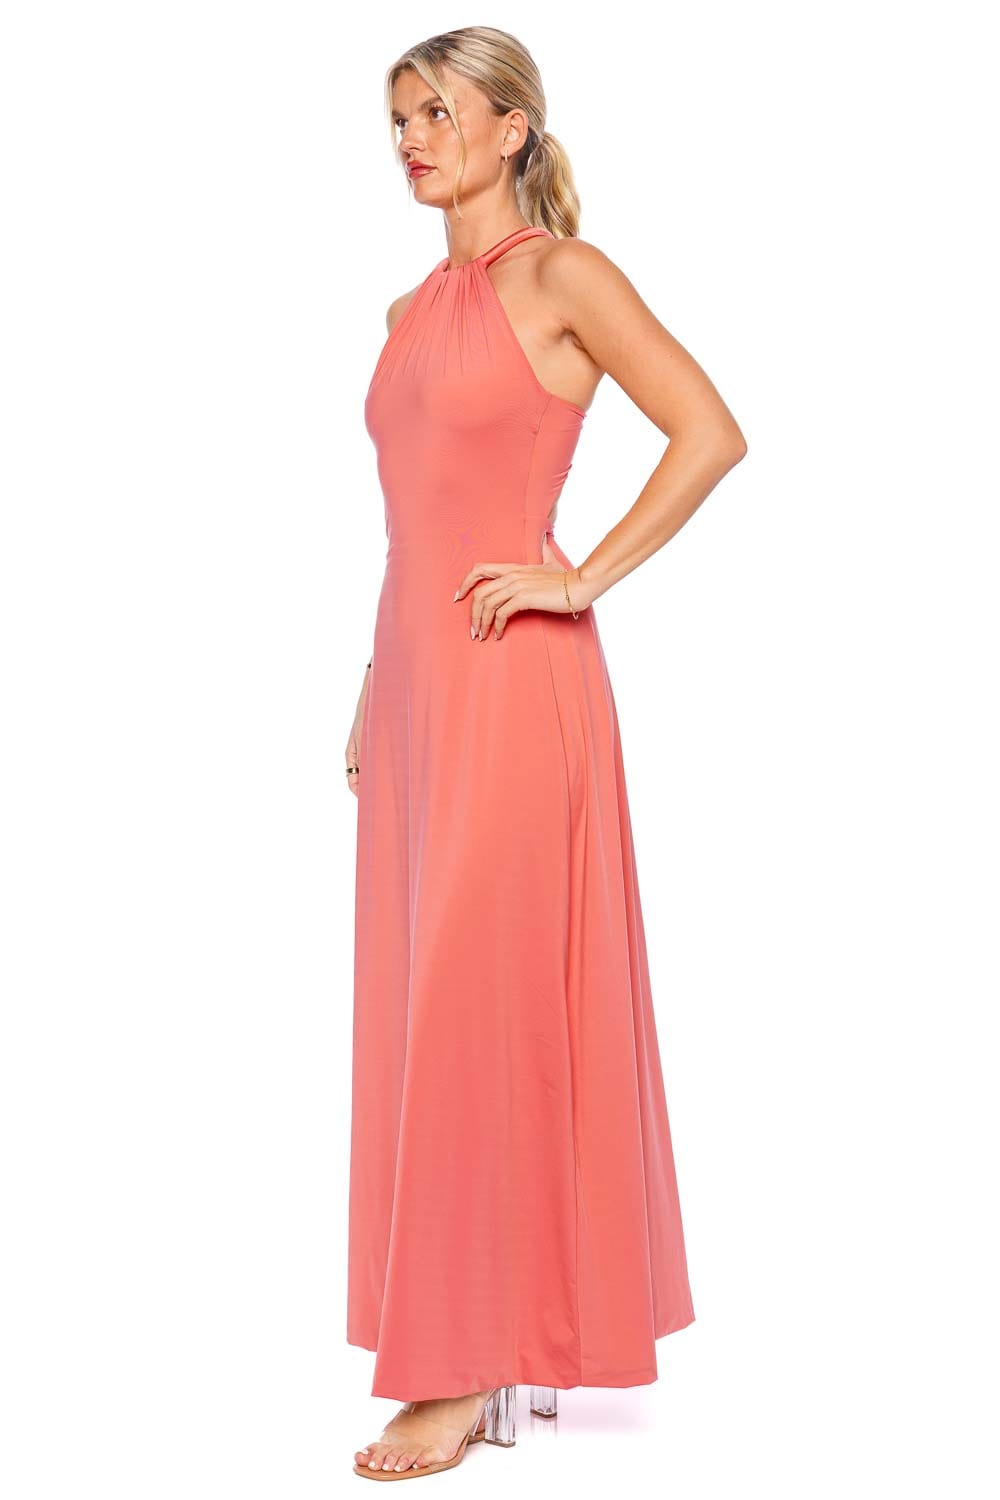 Maygel Coronel Atlaua Tropical Pink Knotted Maxi Dress